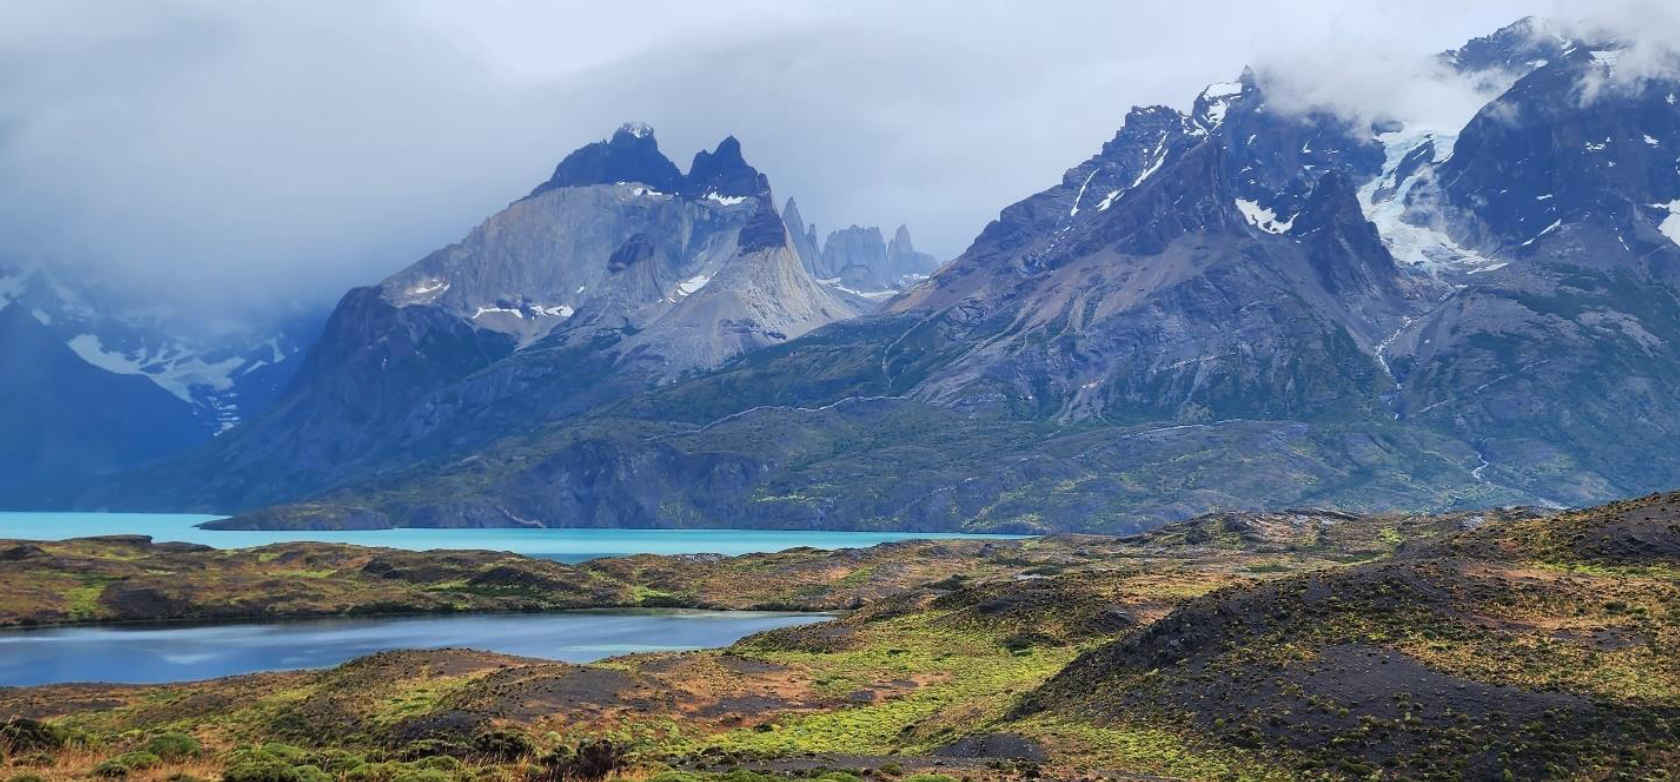 Torres del Paine Massif. A massif is a compact group of mountains.